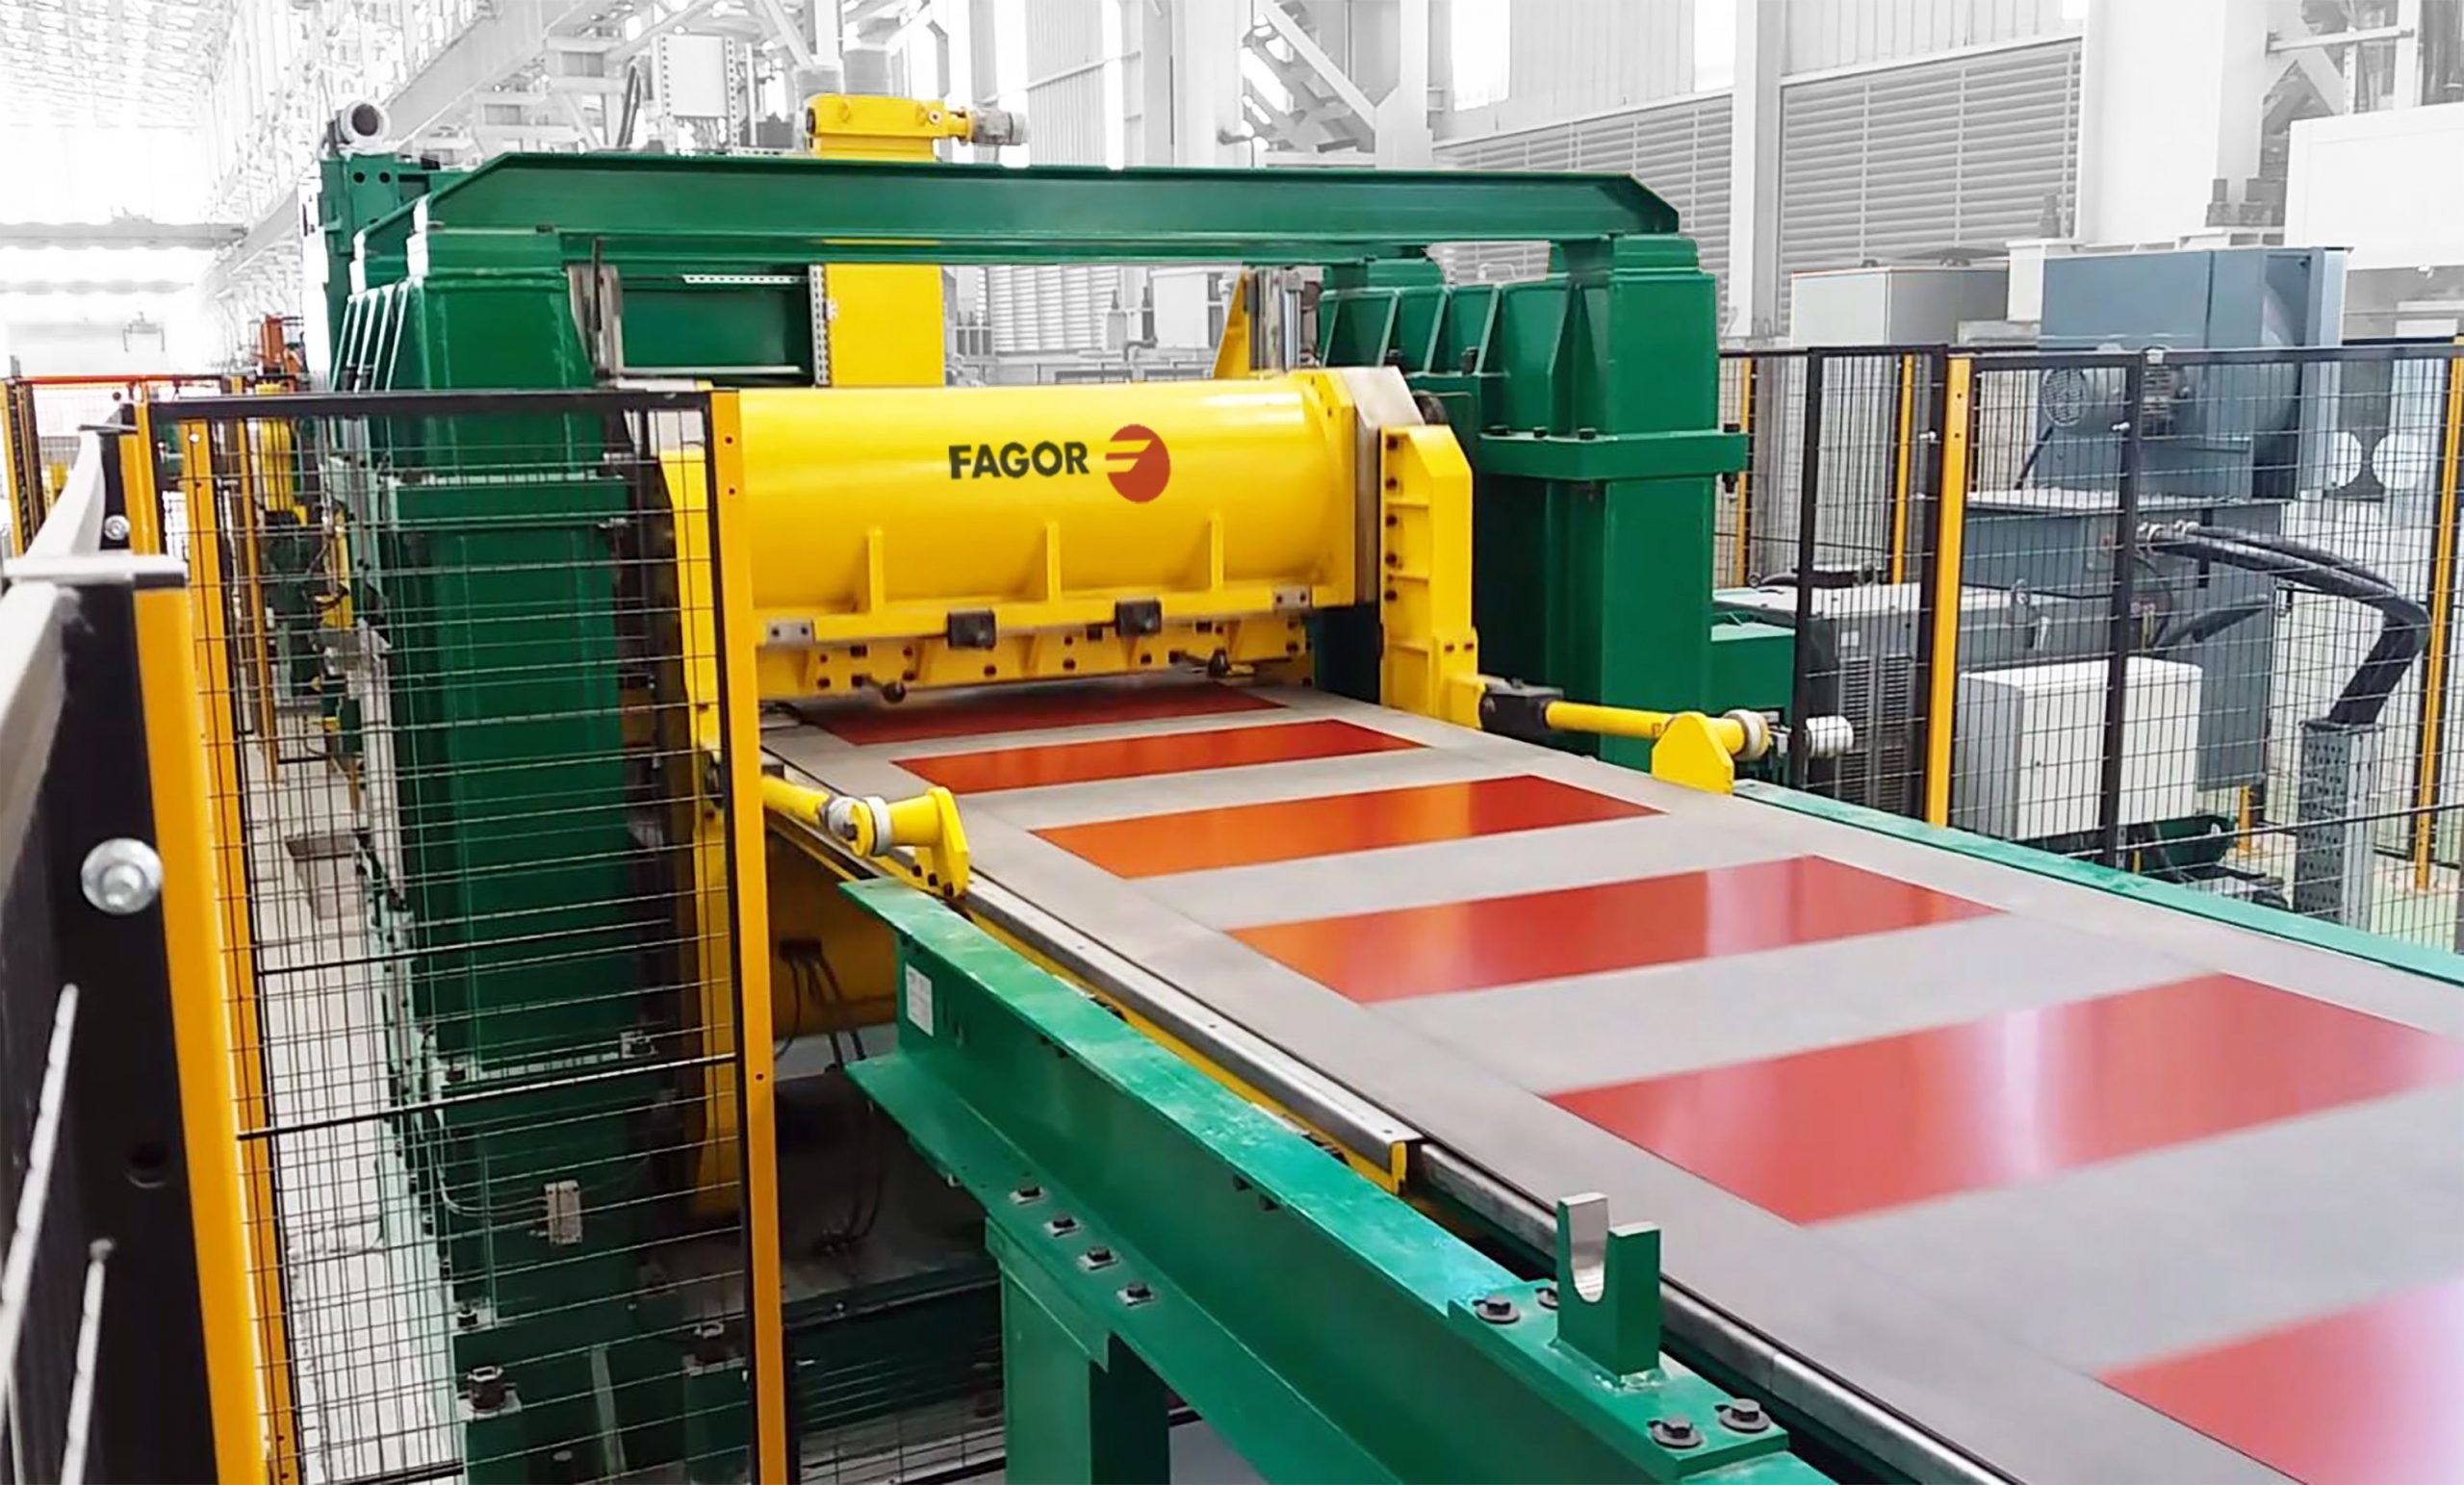 Fagor Arrasate event: FAGOR ARRASATE CONTINUES ITS GROWTH IN RUSSIA WITH A FULLY AUTOMATED CUT-TO-LENGTH LINE FOR SEVERSTAL